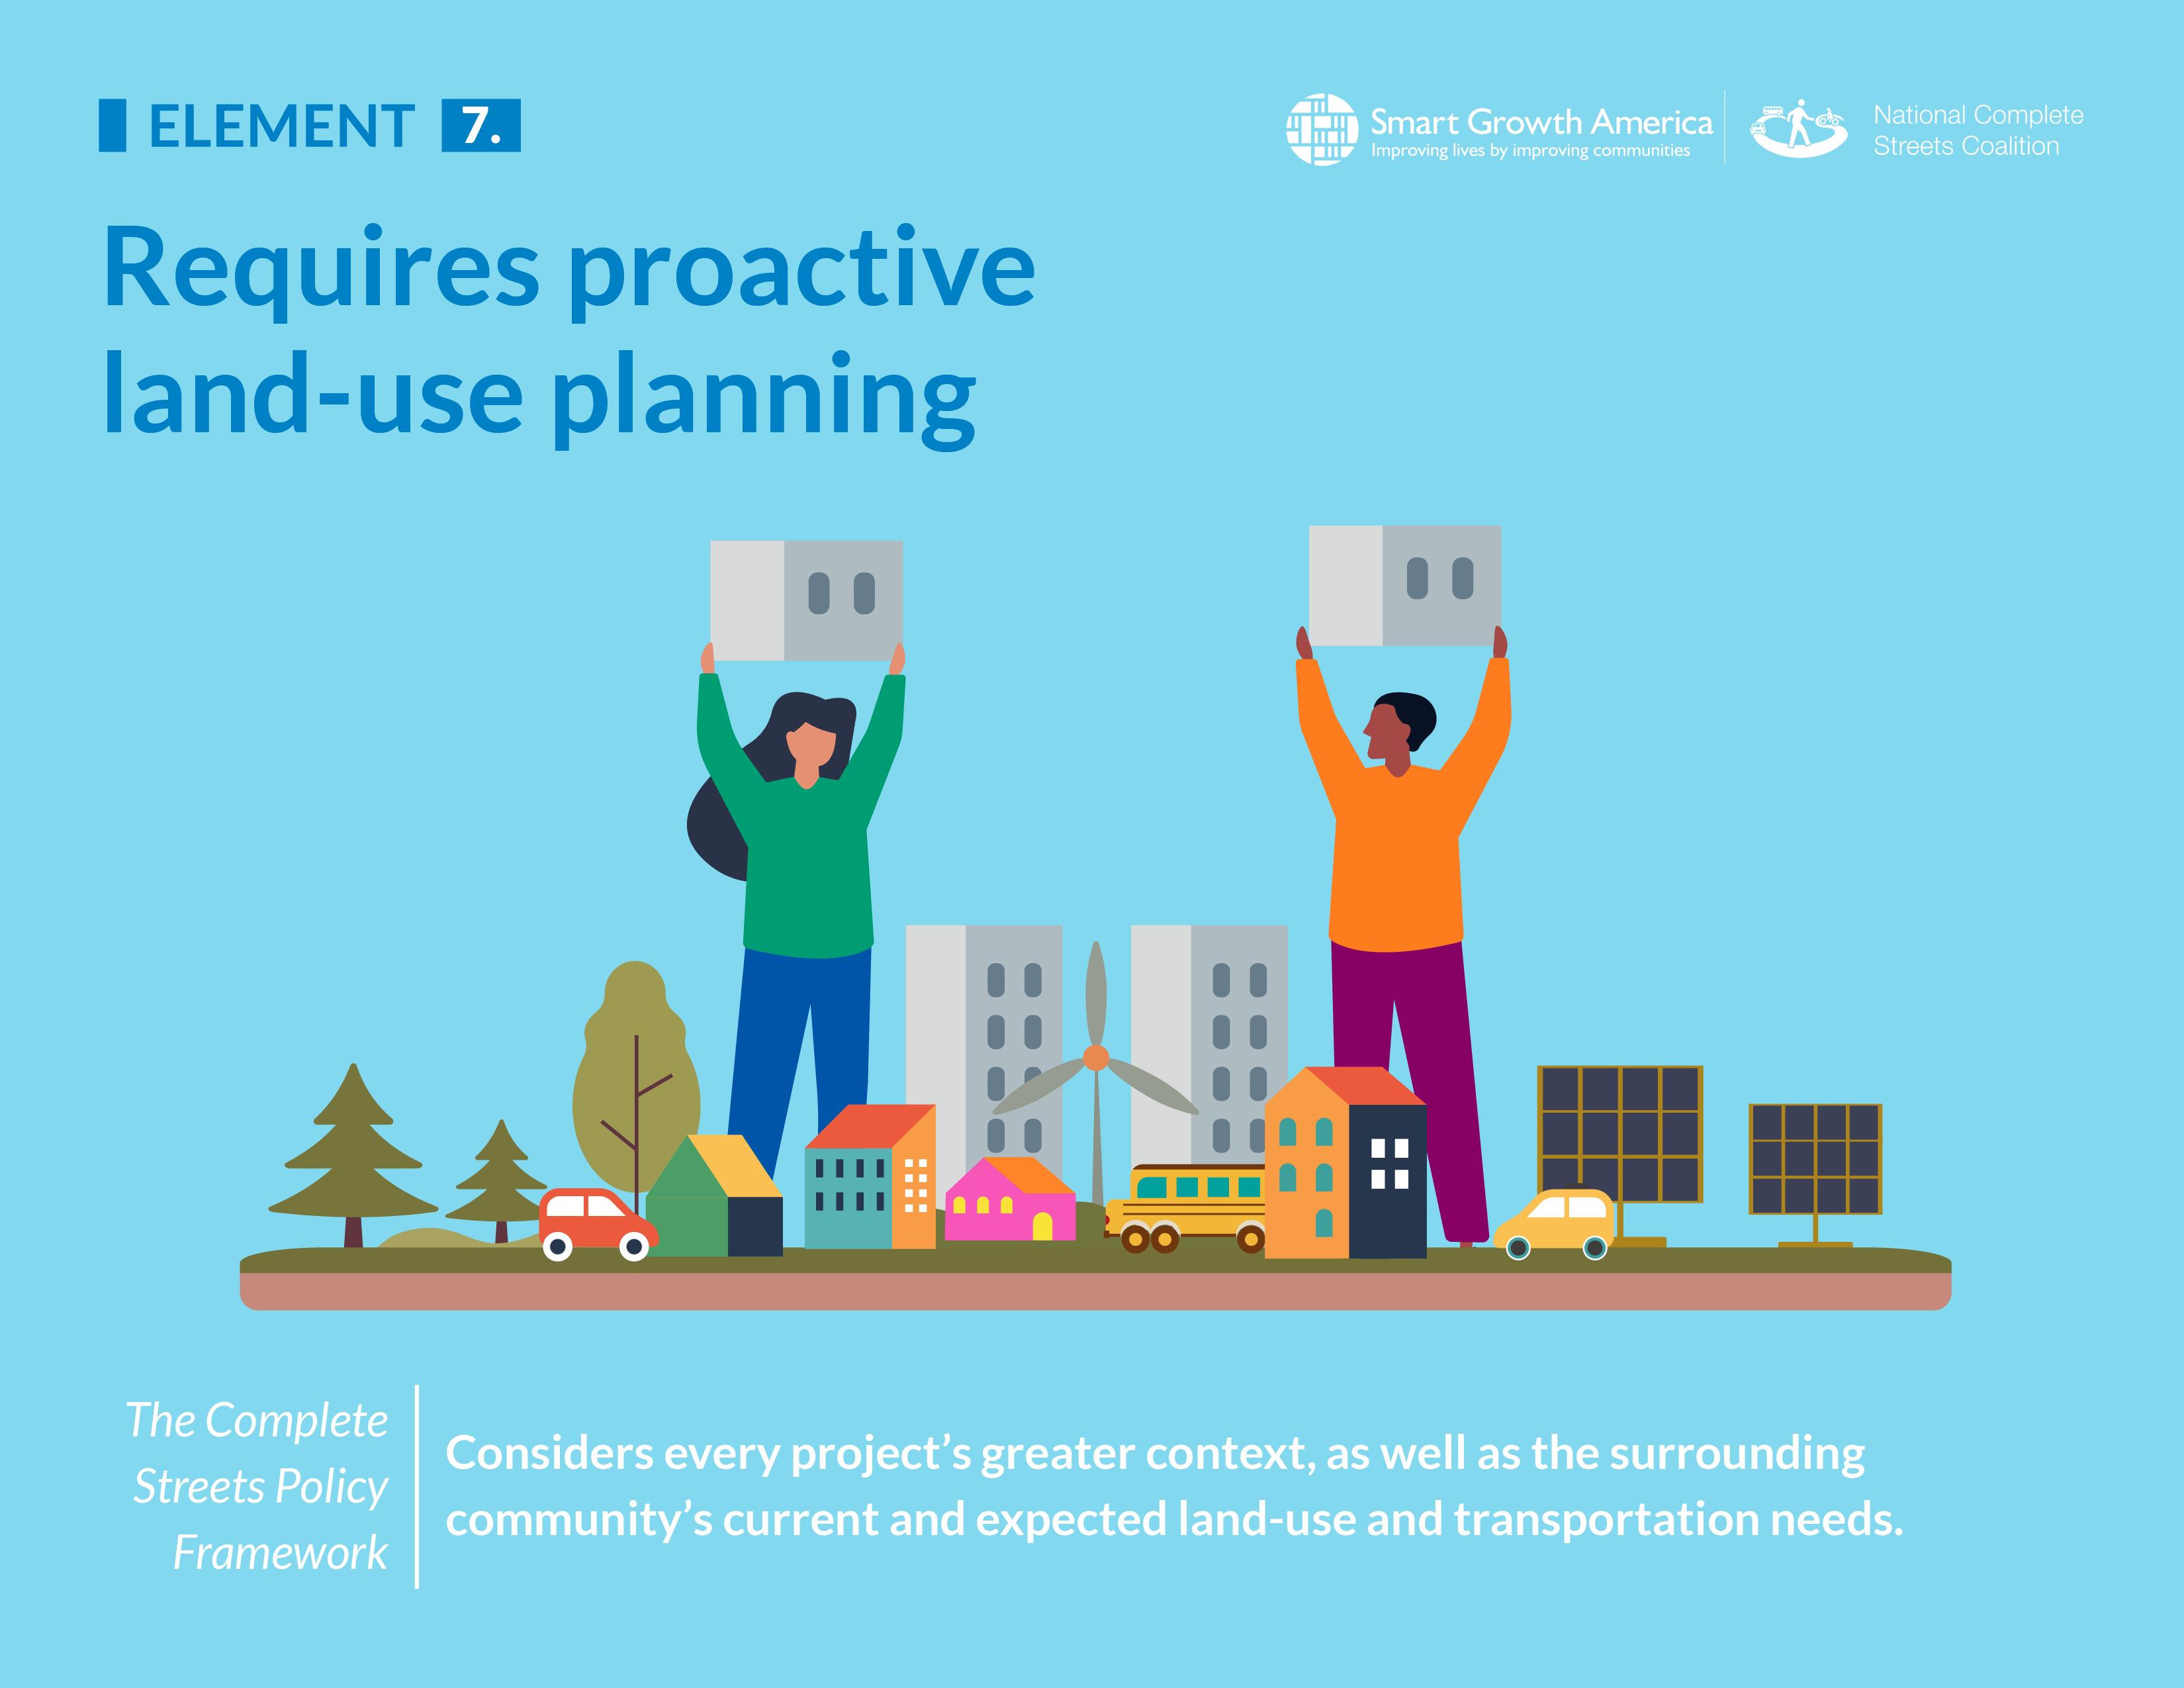 A strong Complete Streets policy requires proactive and supportive land-use planning (element #7)